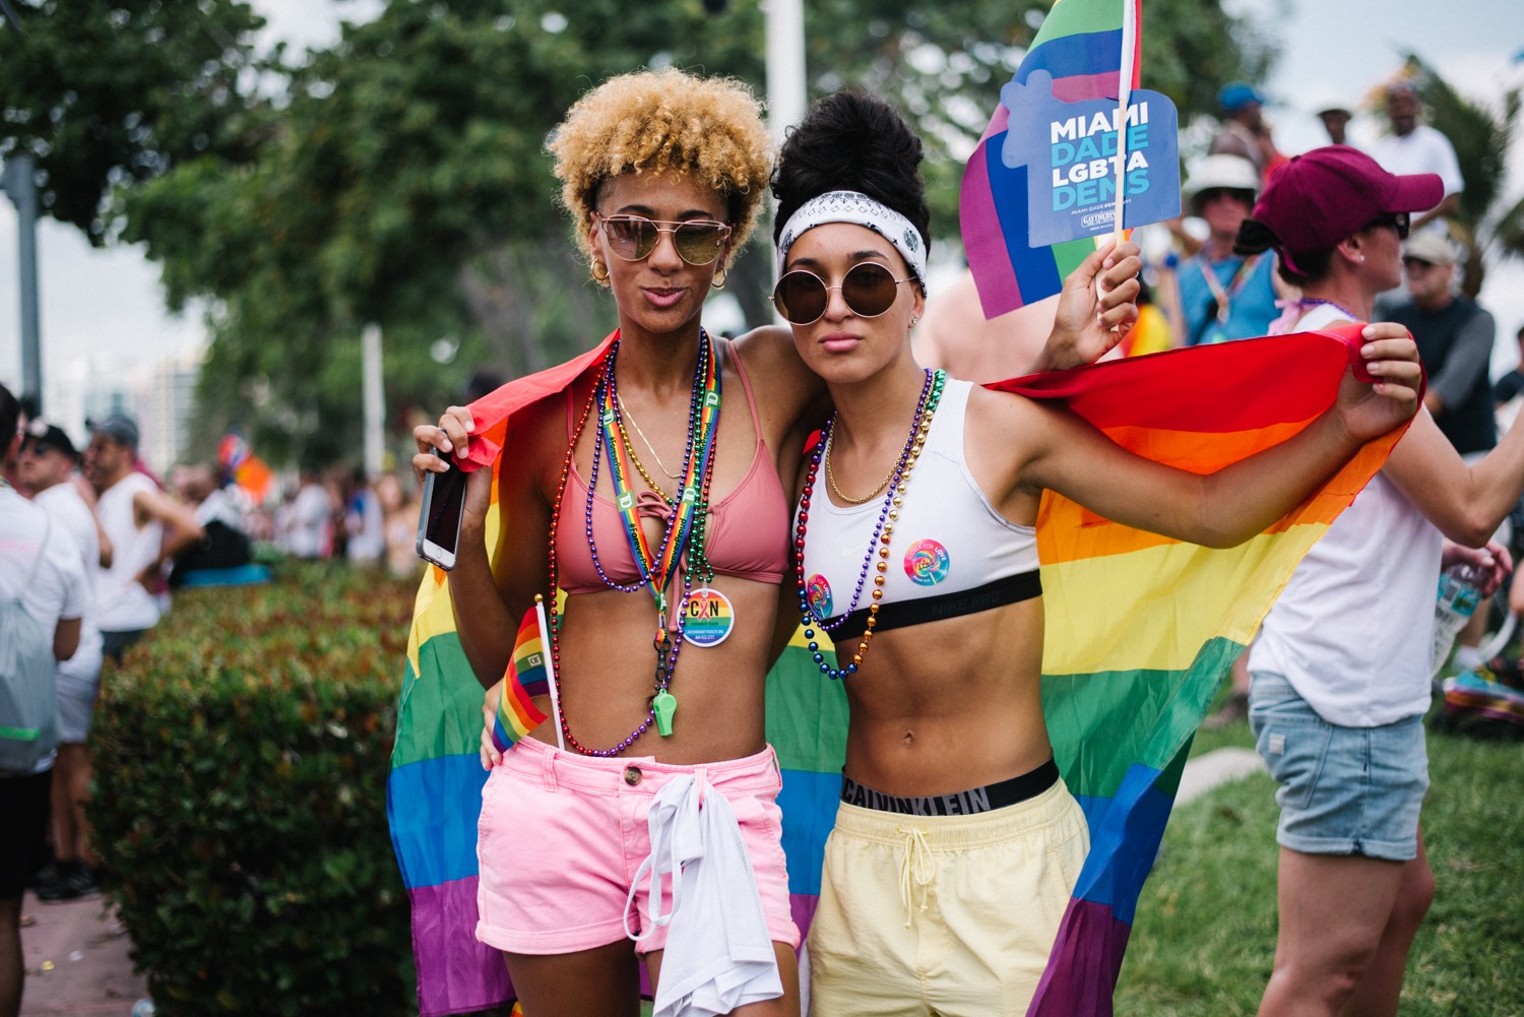 Beach Porn Youth - Miami Beach Pride 2019 Event and Party Guide | Miami New Times